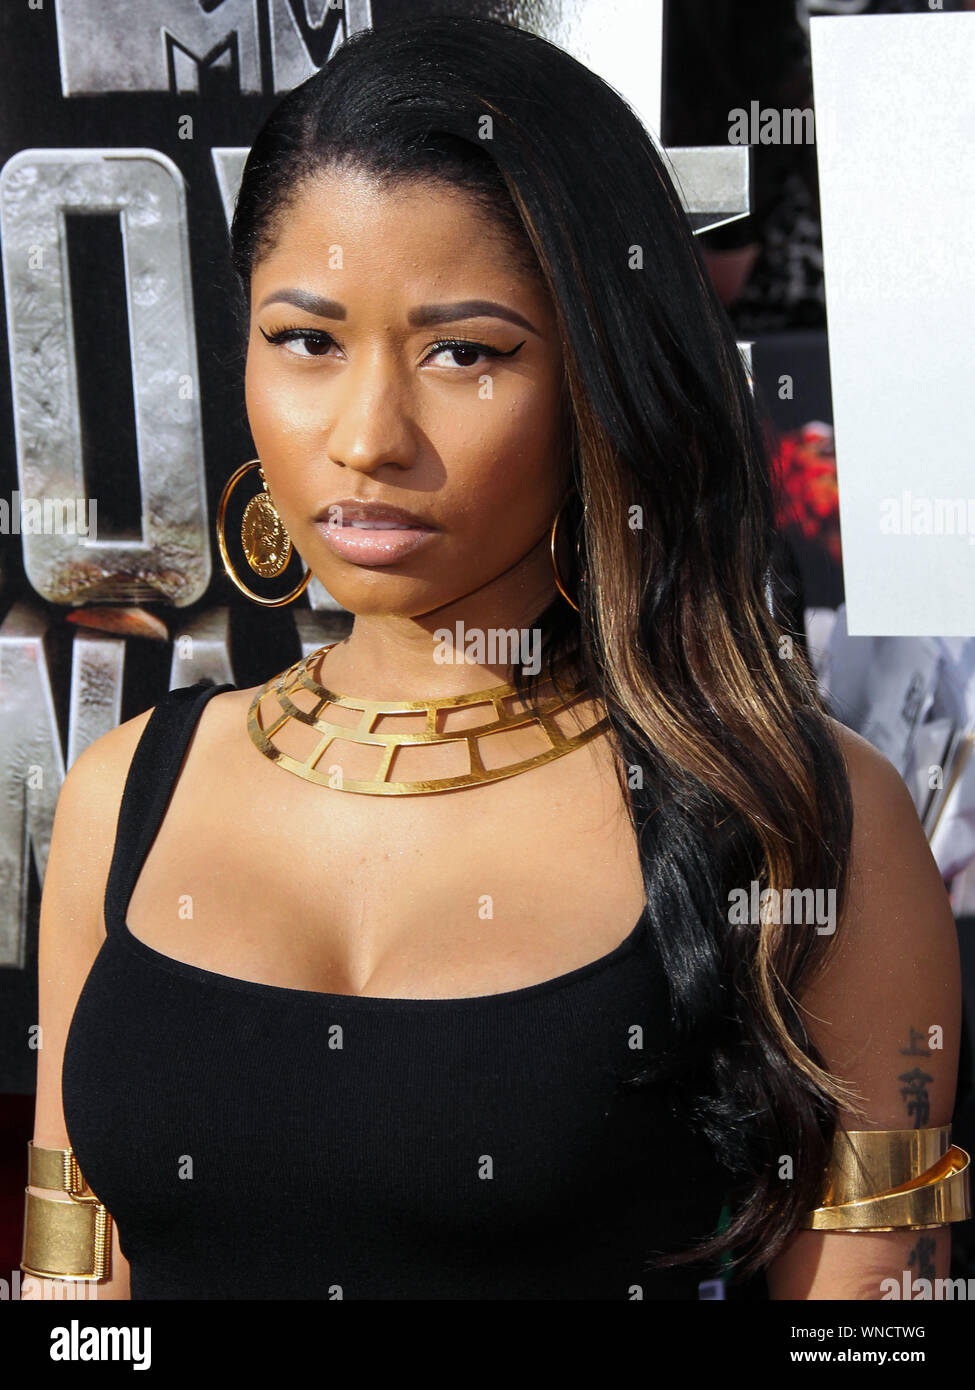 Los Angeles, United States. 13th Apr, 2014. (FILE) Nicki Minaj Announces Retirement On Twitter. LOS ANGELES, CA, USA - APRIL 13: Rapper Nicki Minaj wearing a floor-length, black gown by Alexander McQueen, with gold cuffs, a large gold necklace and a gorgeous ring by John Hardy arrives at the 2014 MTV Movie Awards held at Nokia Theatre L.A. Live on April 13, 2014 in Los Angeles, California, United States. (Photo by Xavier Collin/Image Press Agency) Credit: Image Press Agency/Alamy Live News Stock Photo